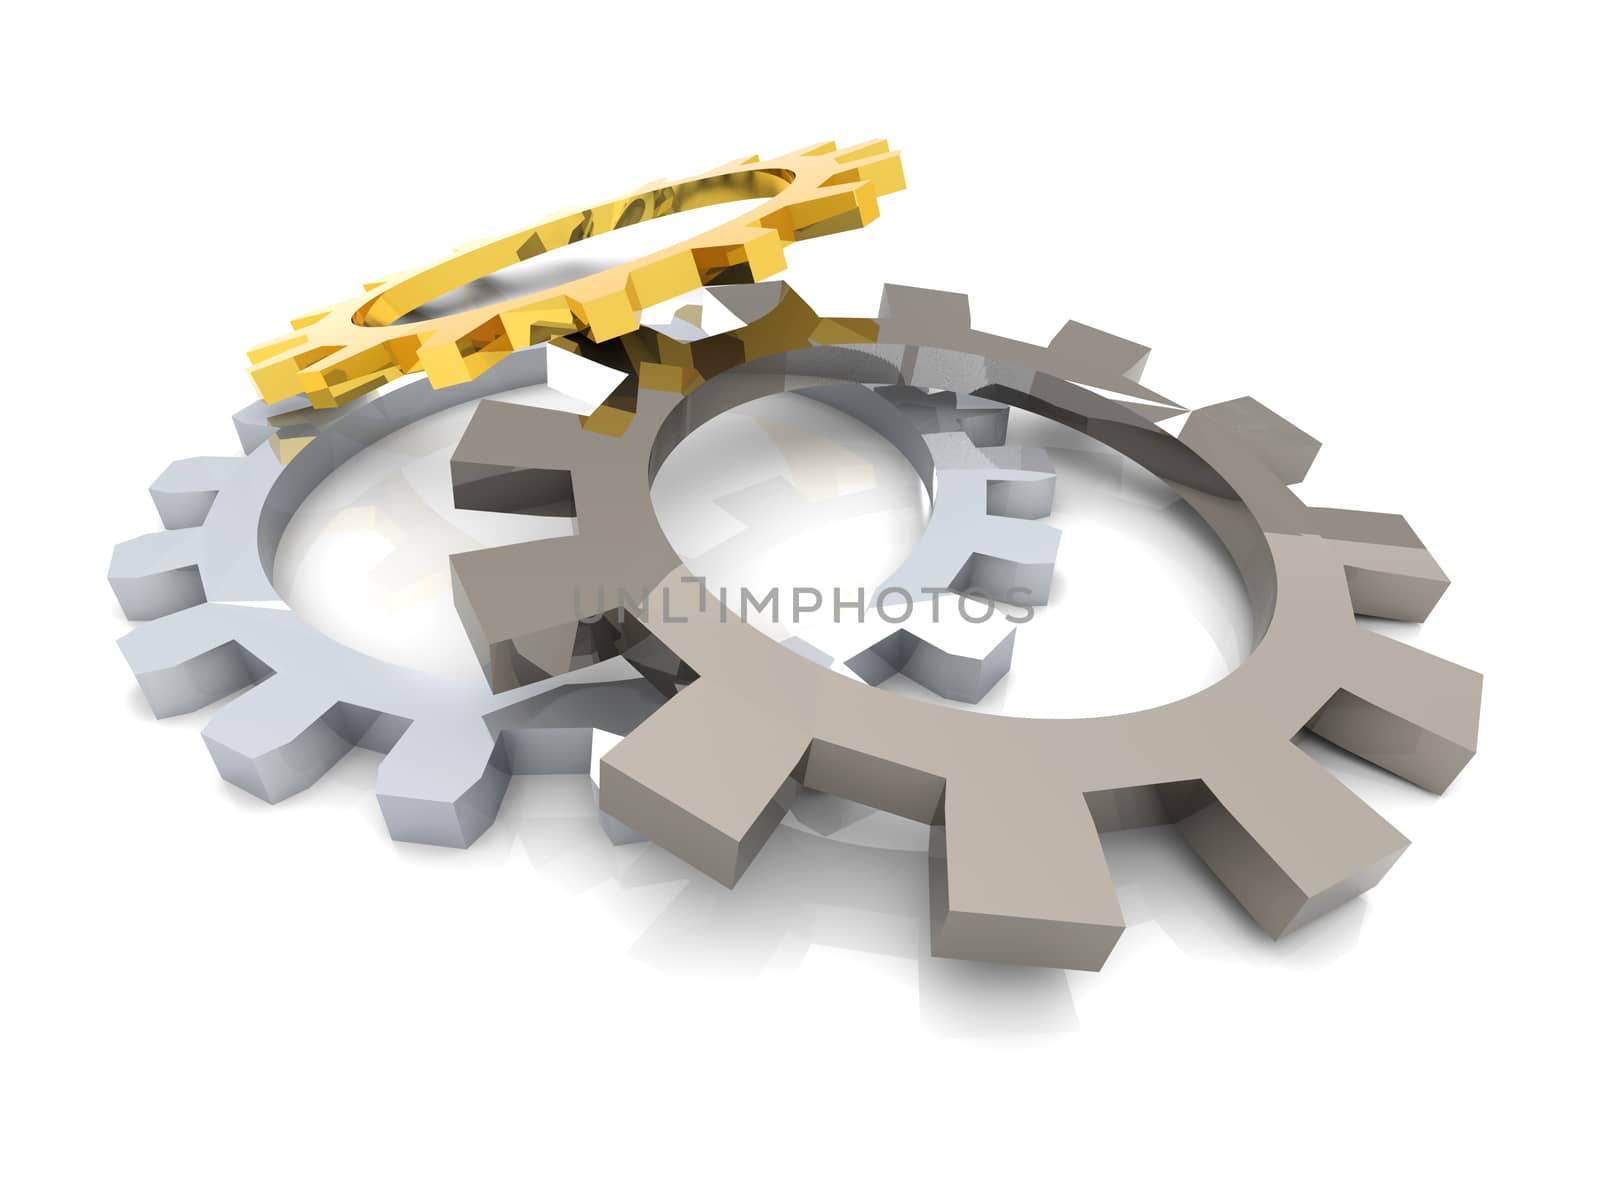 3D rendered Illustration. Isolated on white. 